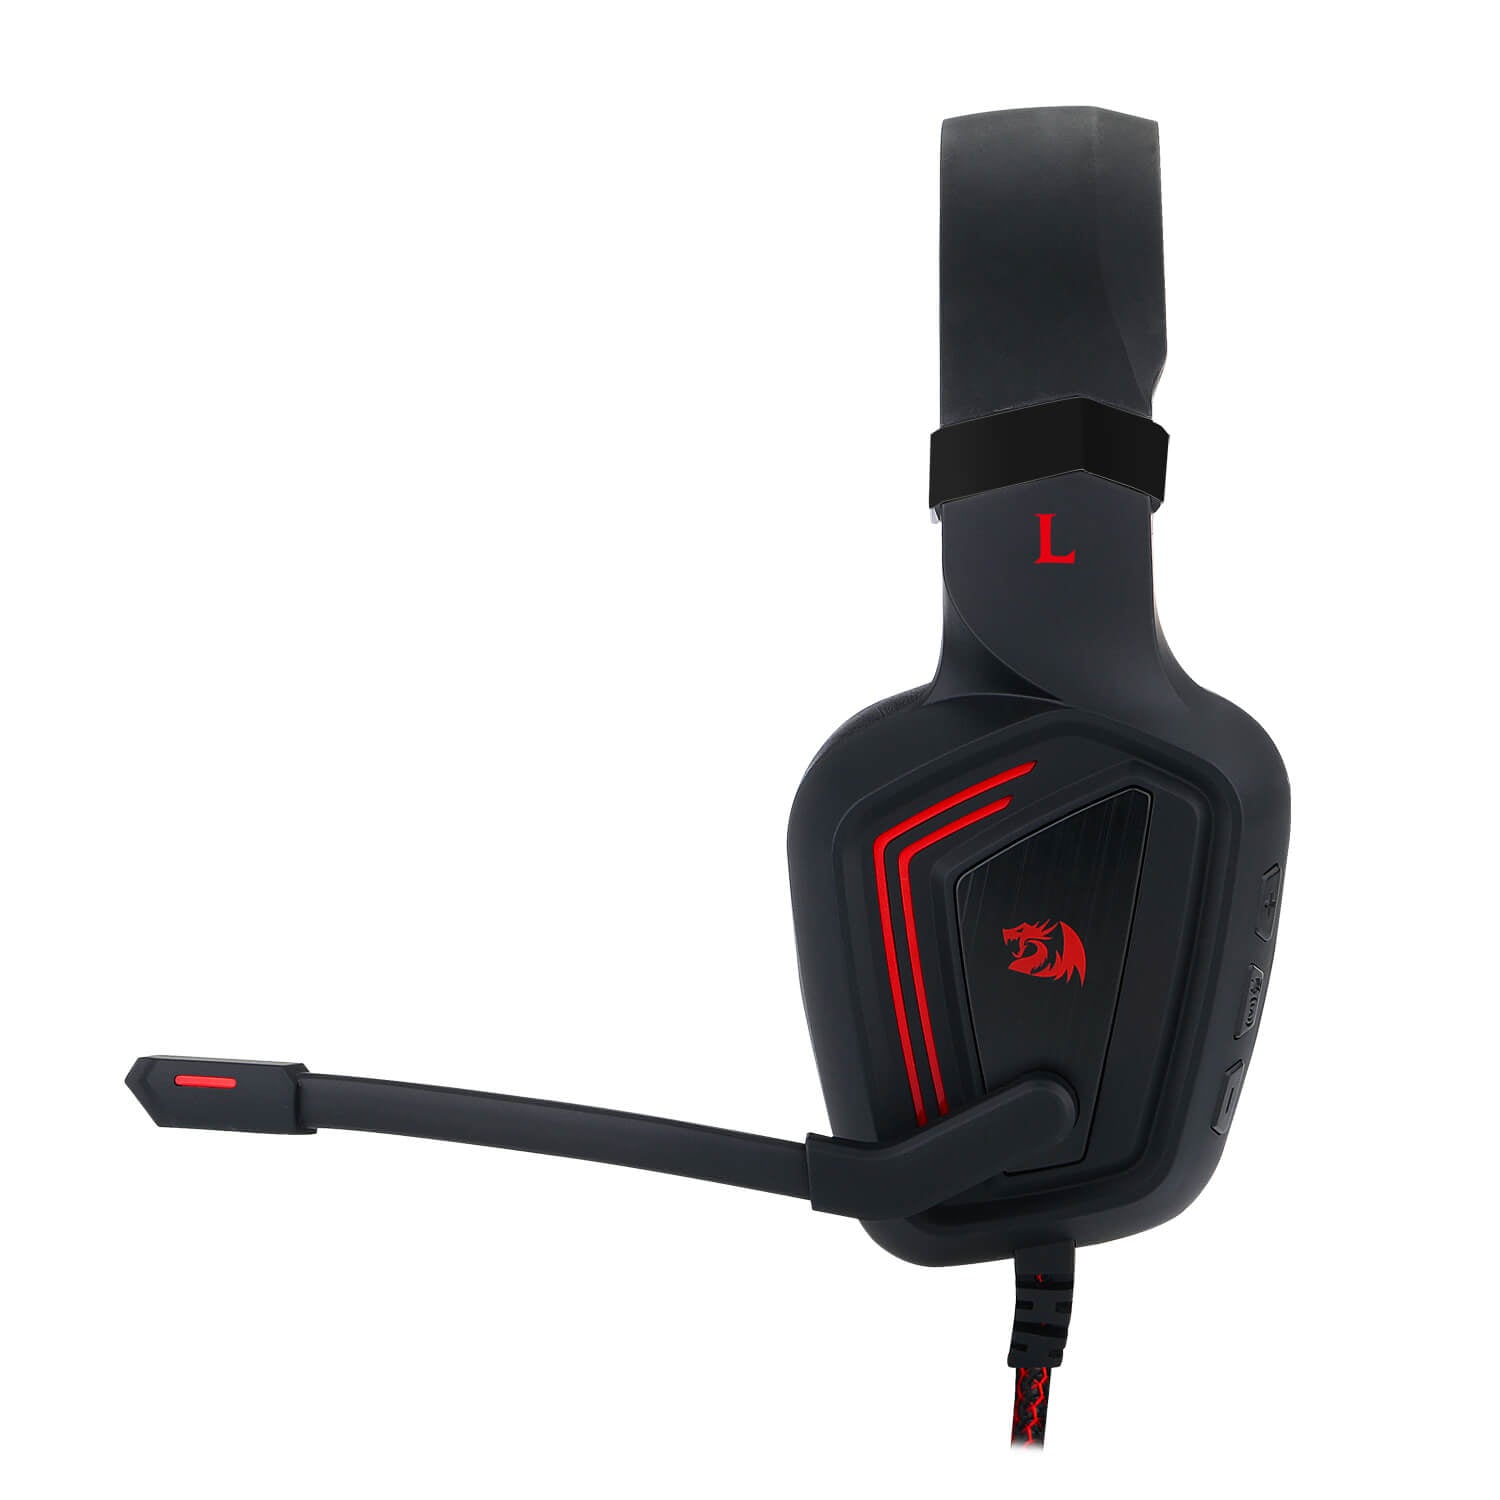 Redragon H310 Muses Wired Gaming Headset, 7.1 Surround-Sound, Pro-Gamer Headphone with Volume Control, Swiveling Noise-Cancellation Microphone, Compatible with PC, PS4/3 and Nintendo Switch